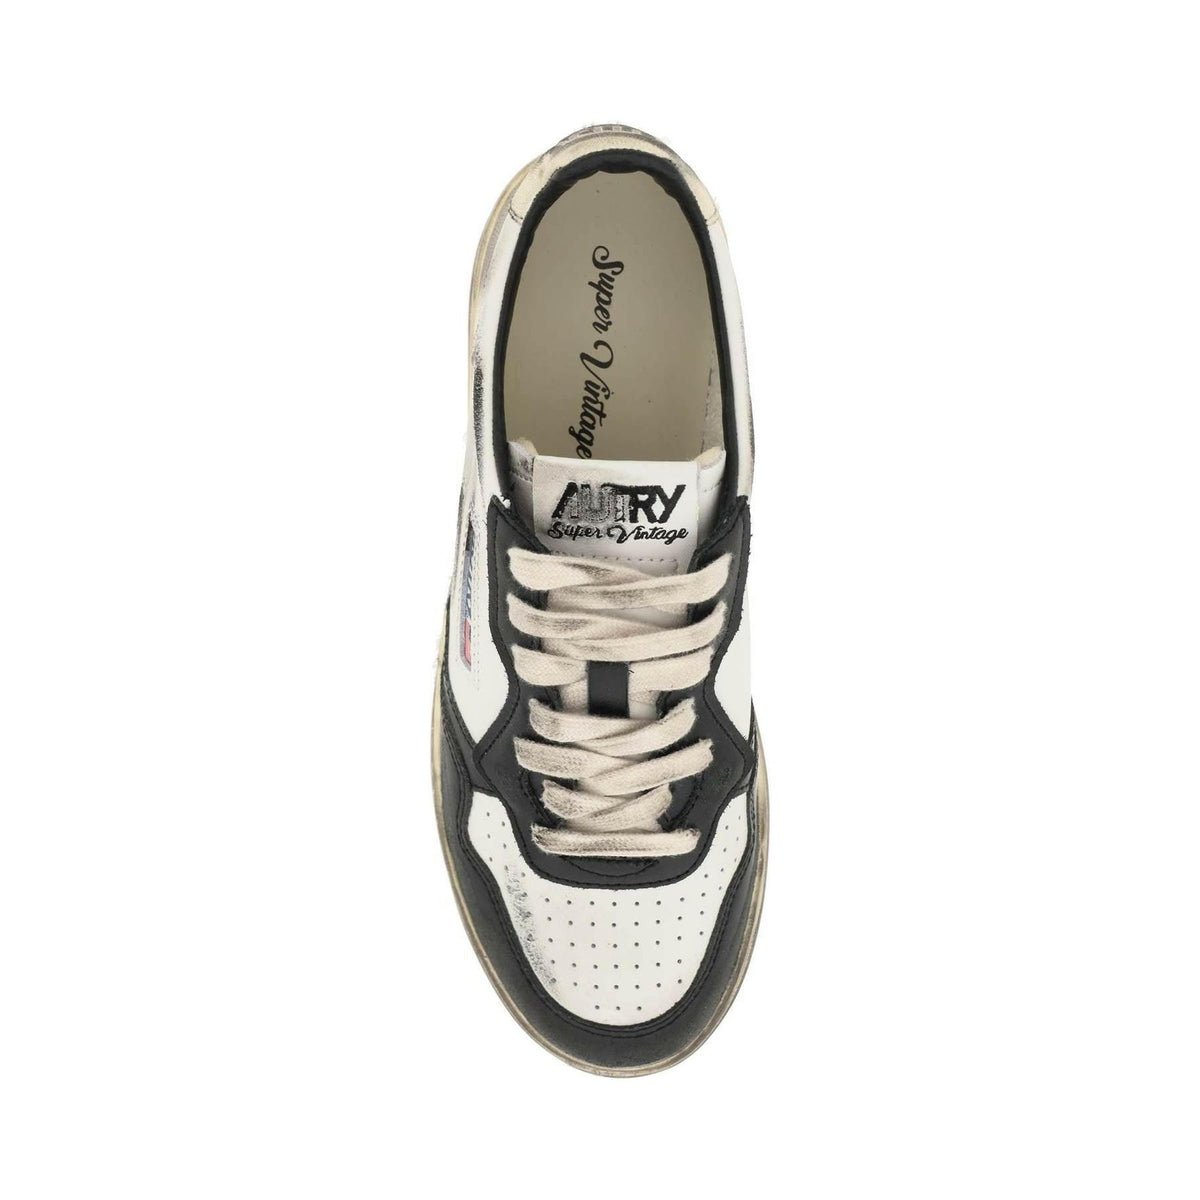 AUTRY - White and Black Medalist Low Super Vintage Sneakers - JOHN JULIA